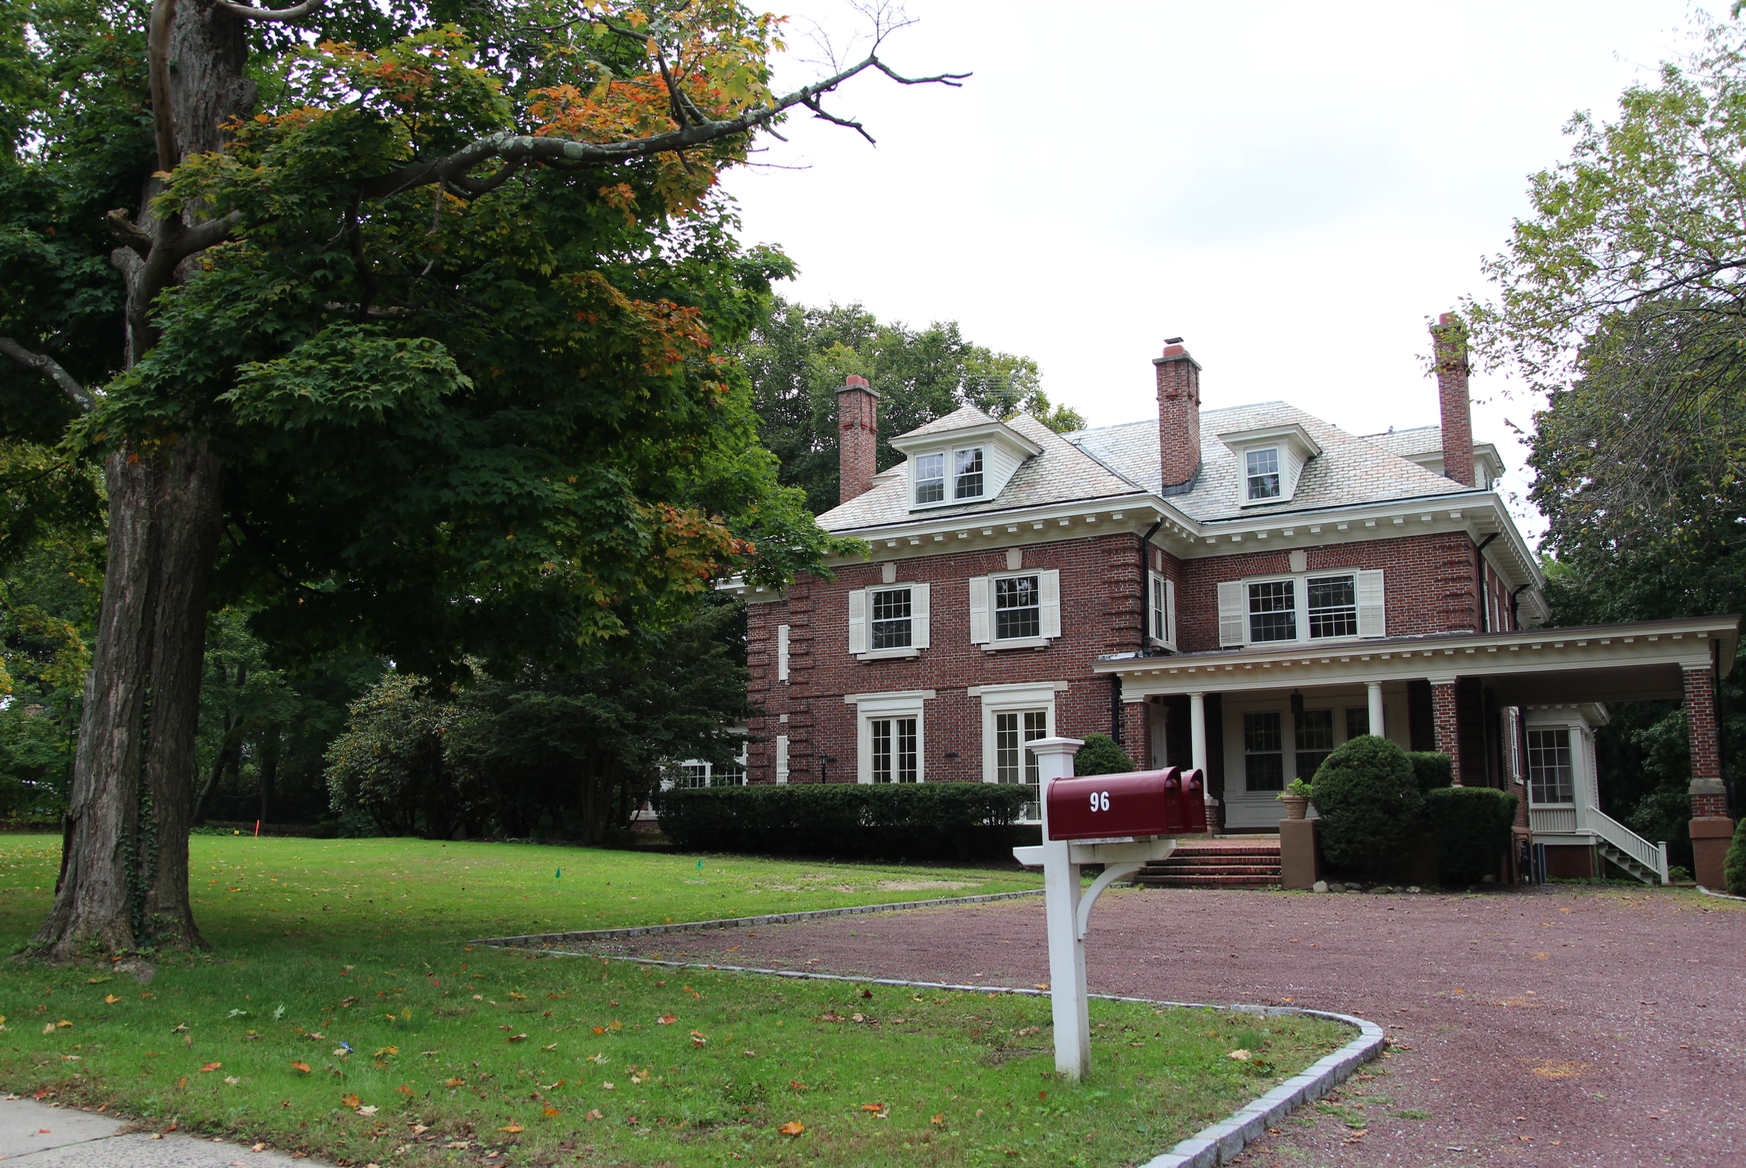 Greenwich Academy purchased 96 Maple Ave, built in 1910, last June for $2,800,000.